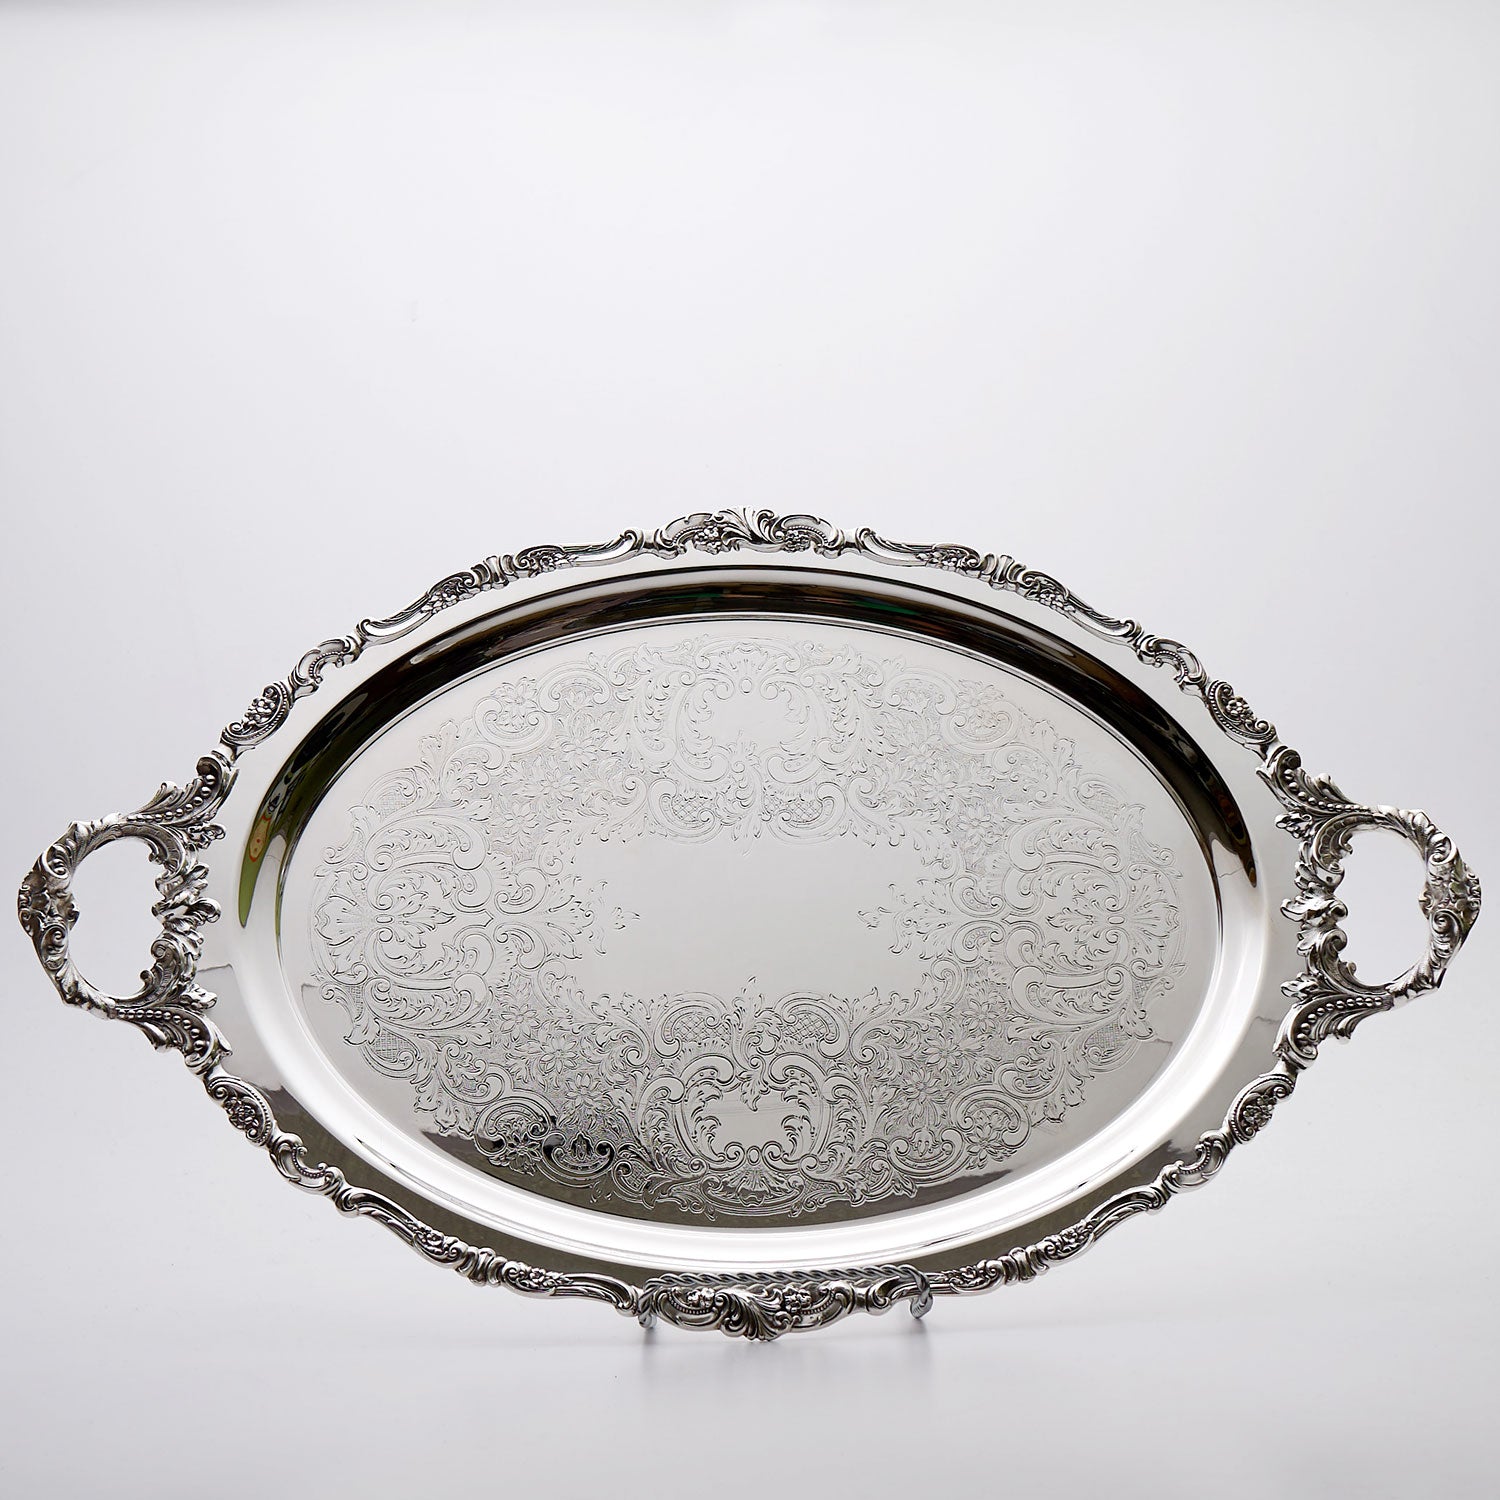 Forzieri Silver Plated Brass Decorative Plate at FORZIERI